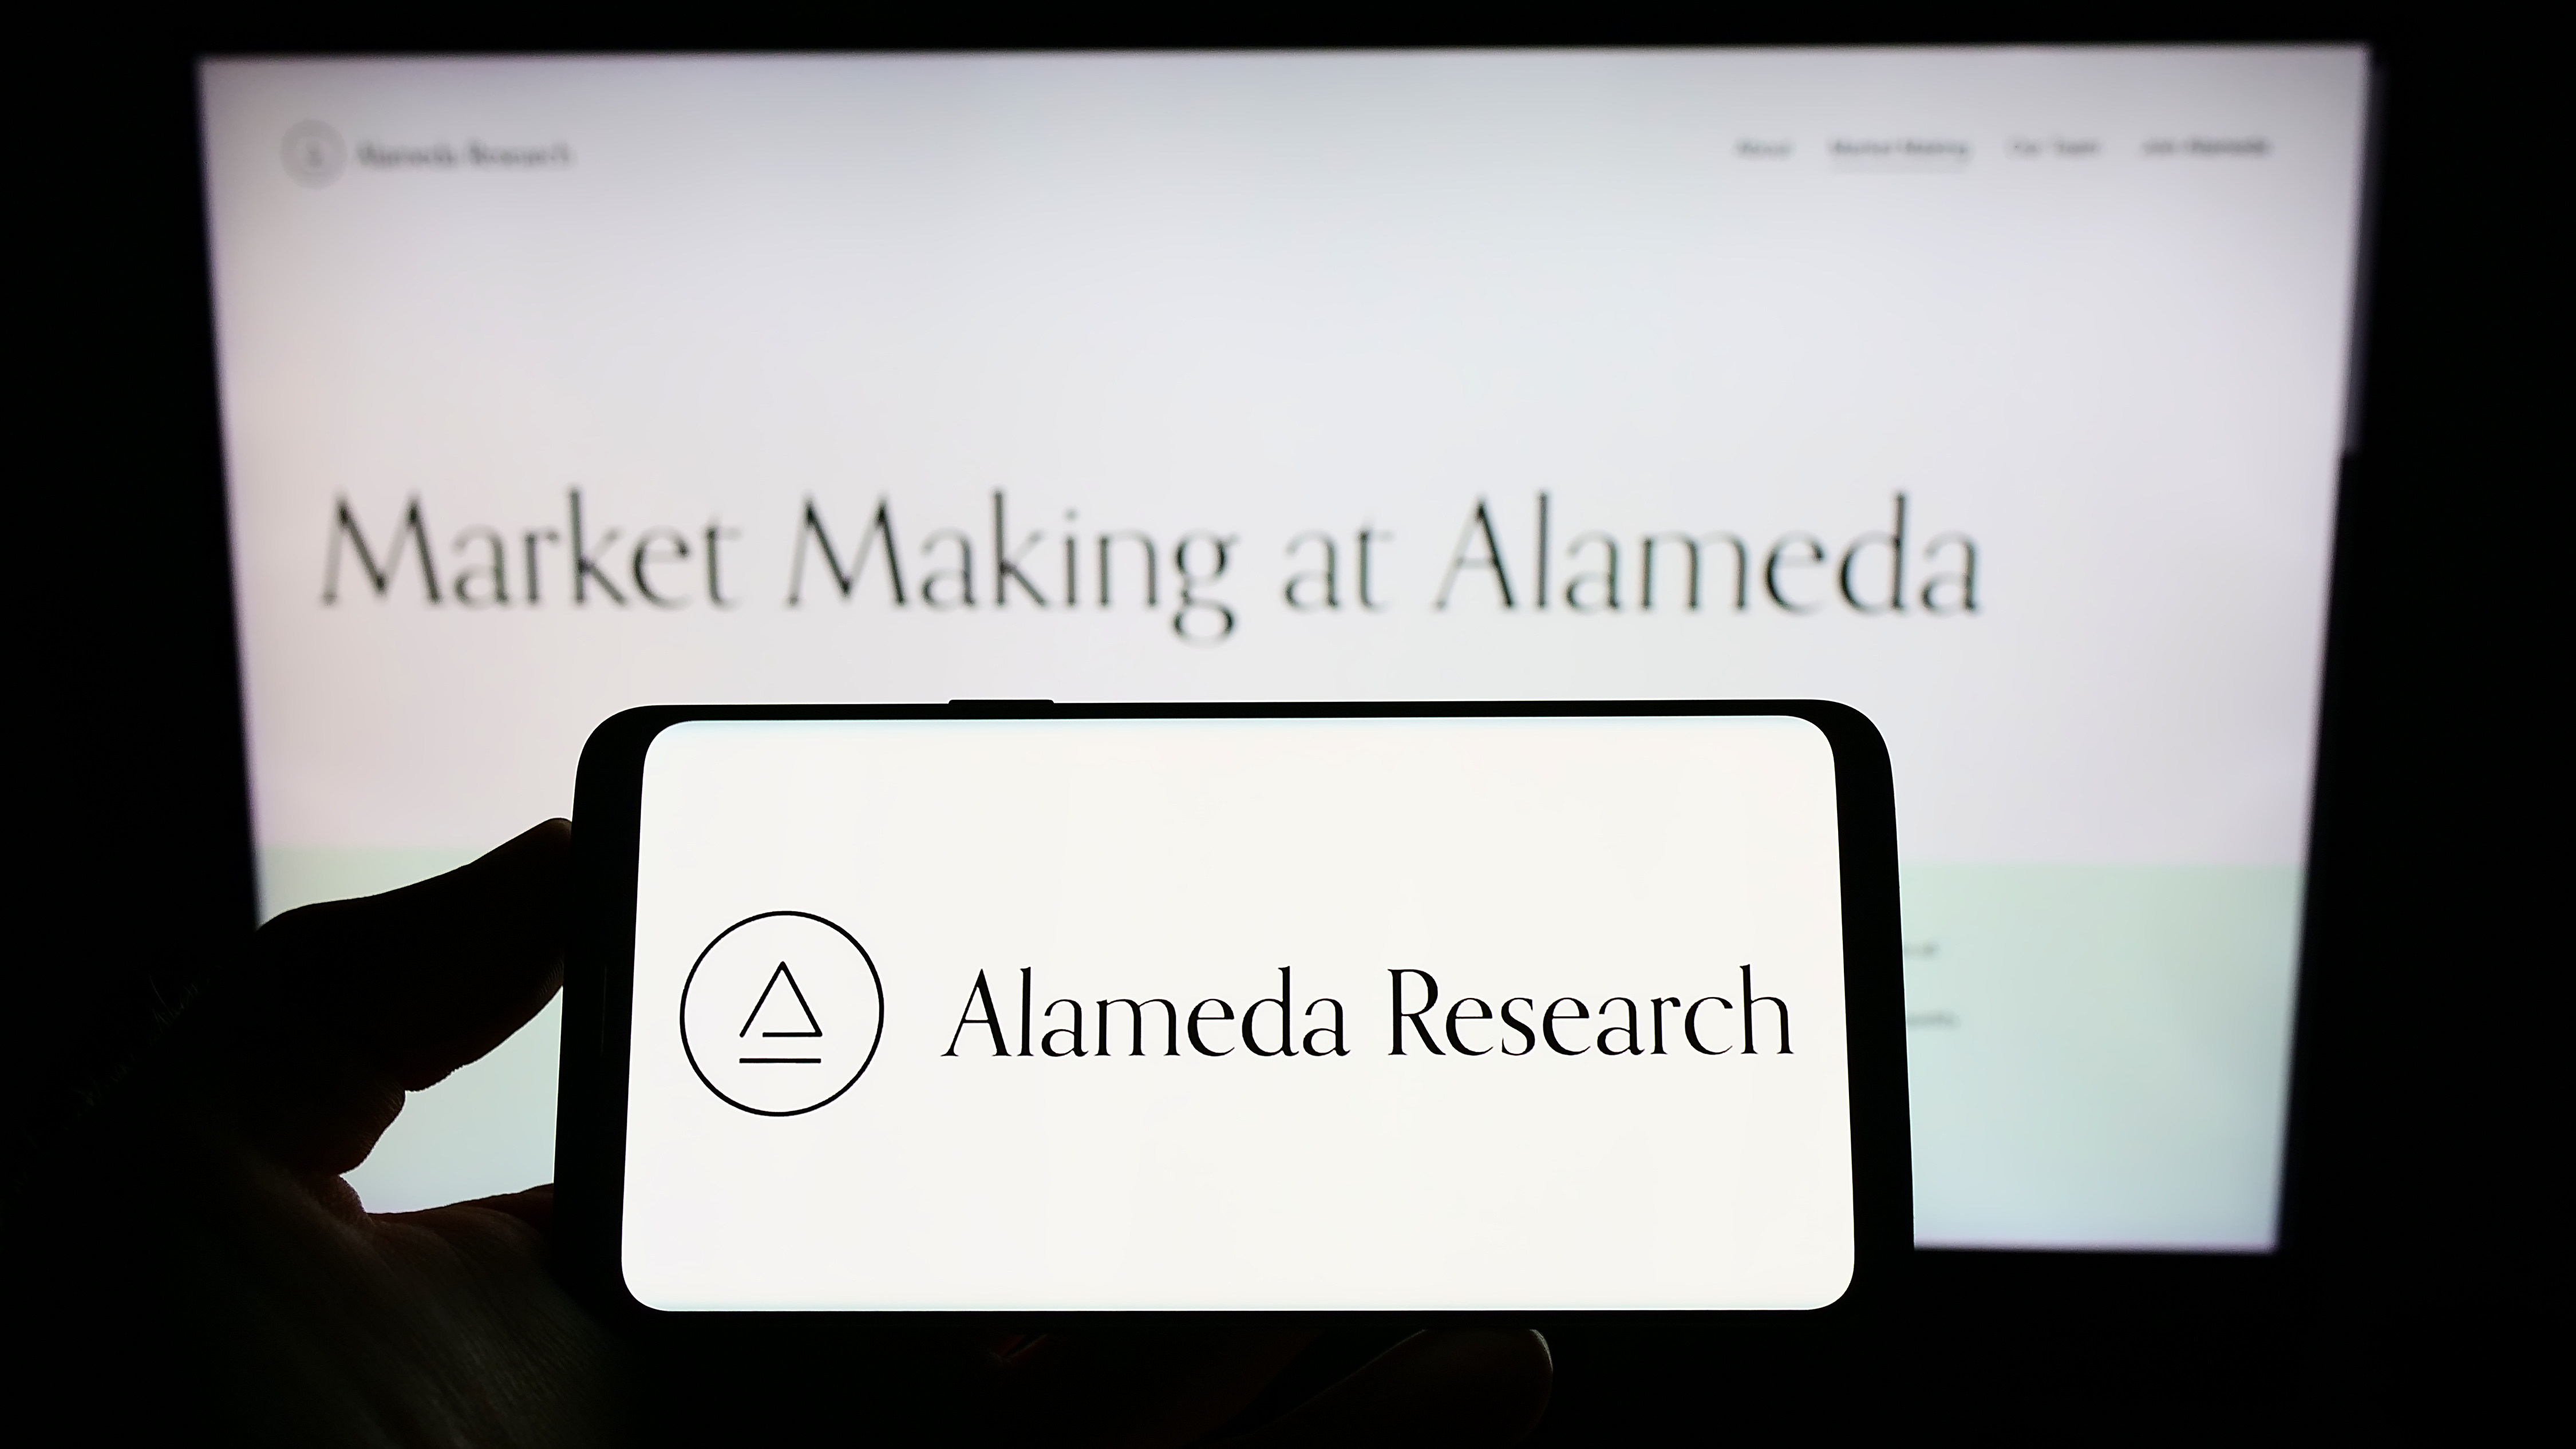 Alameda Research&amp;#039;s extensive involvement in minting nearly $40 billion USDT